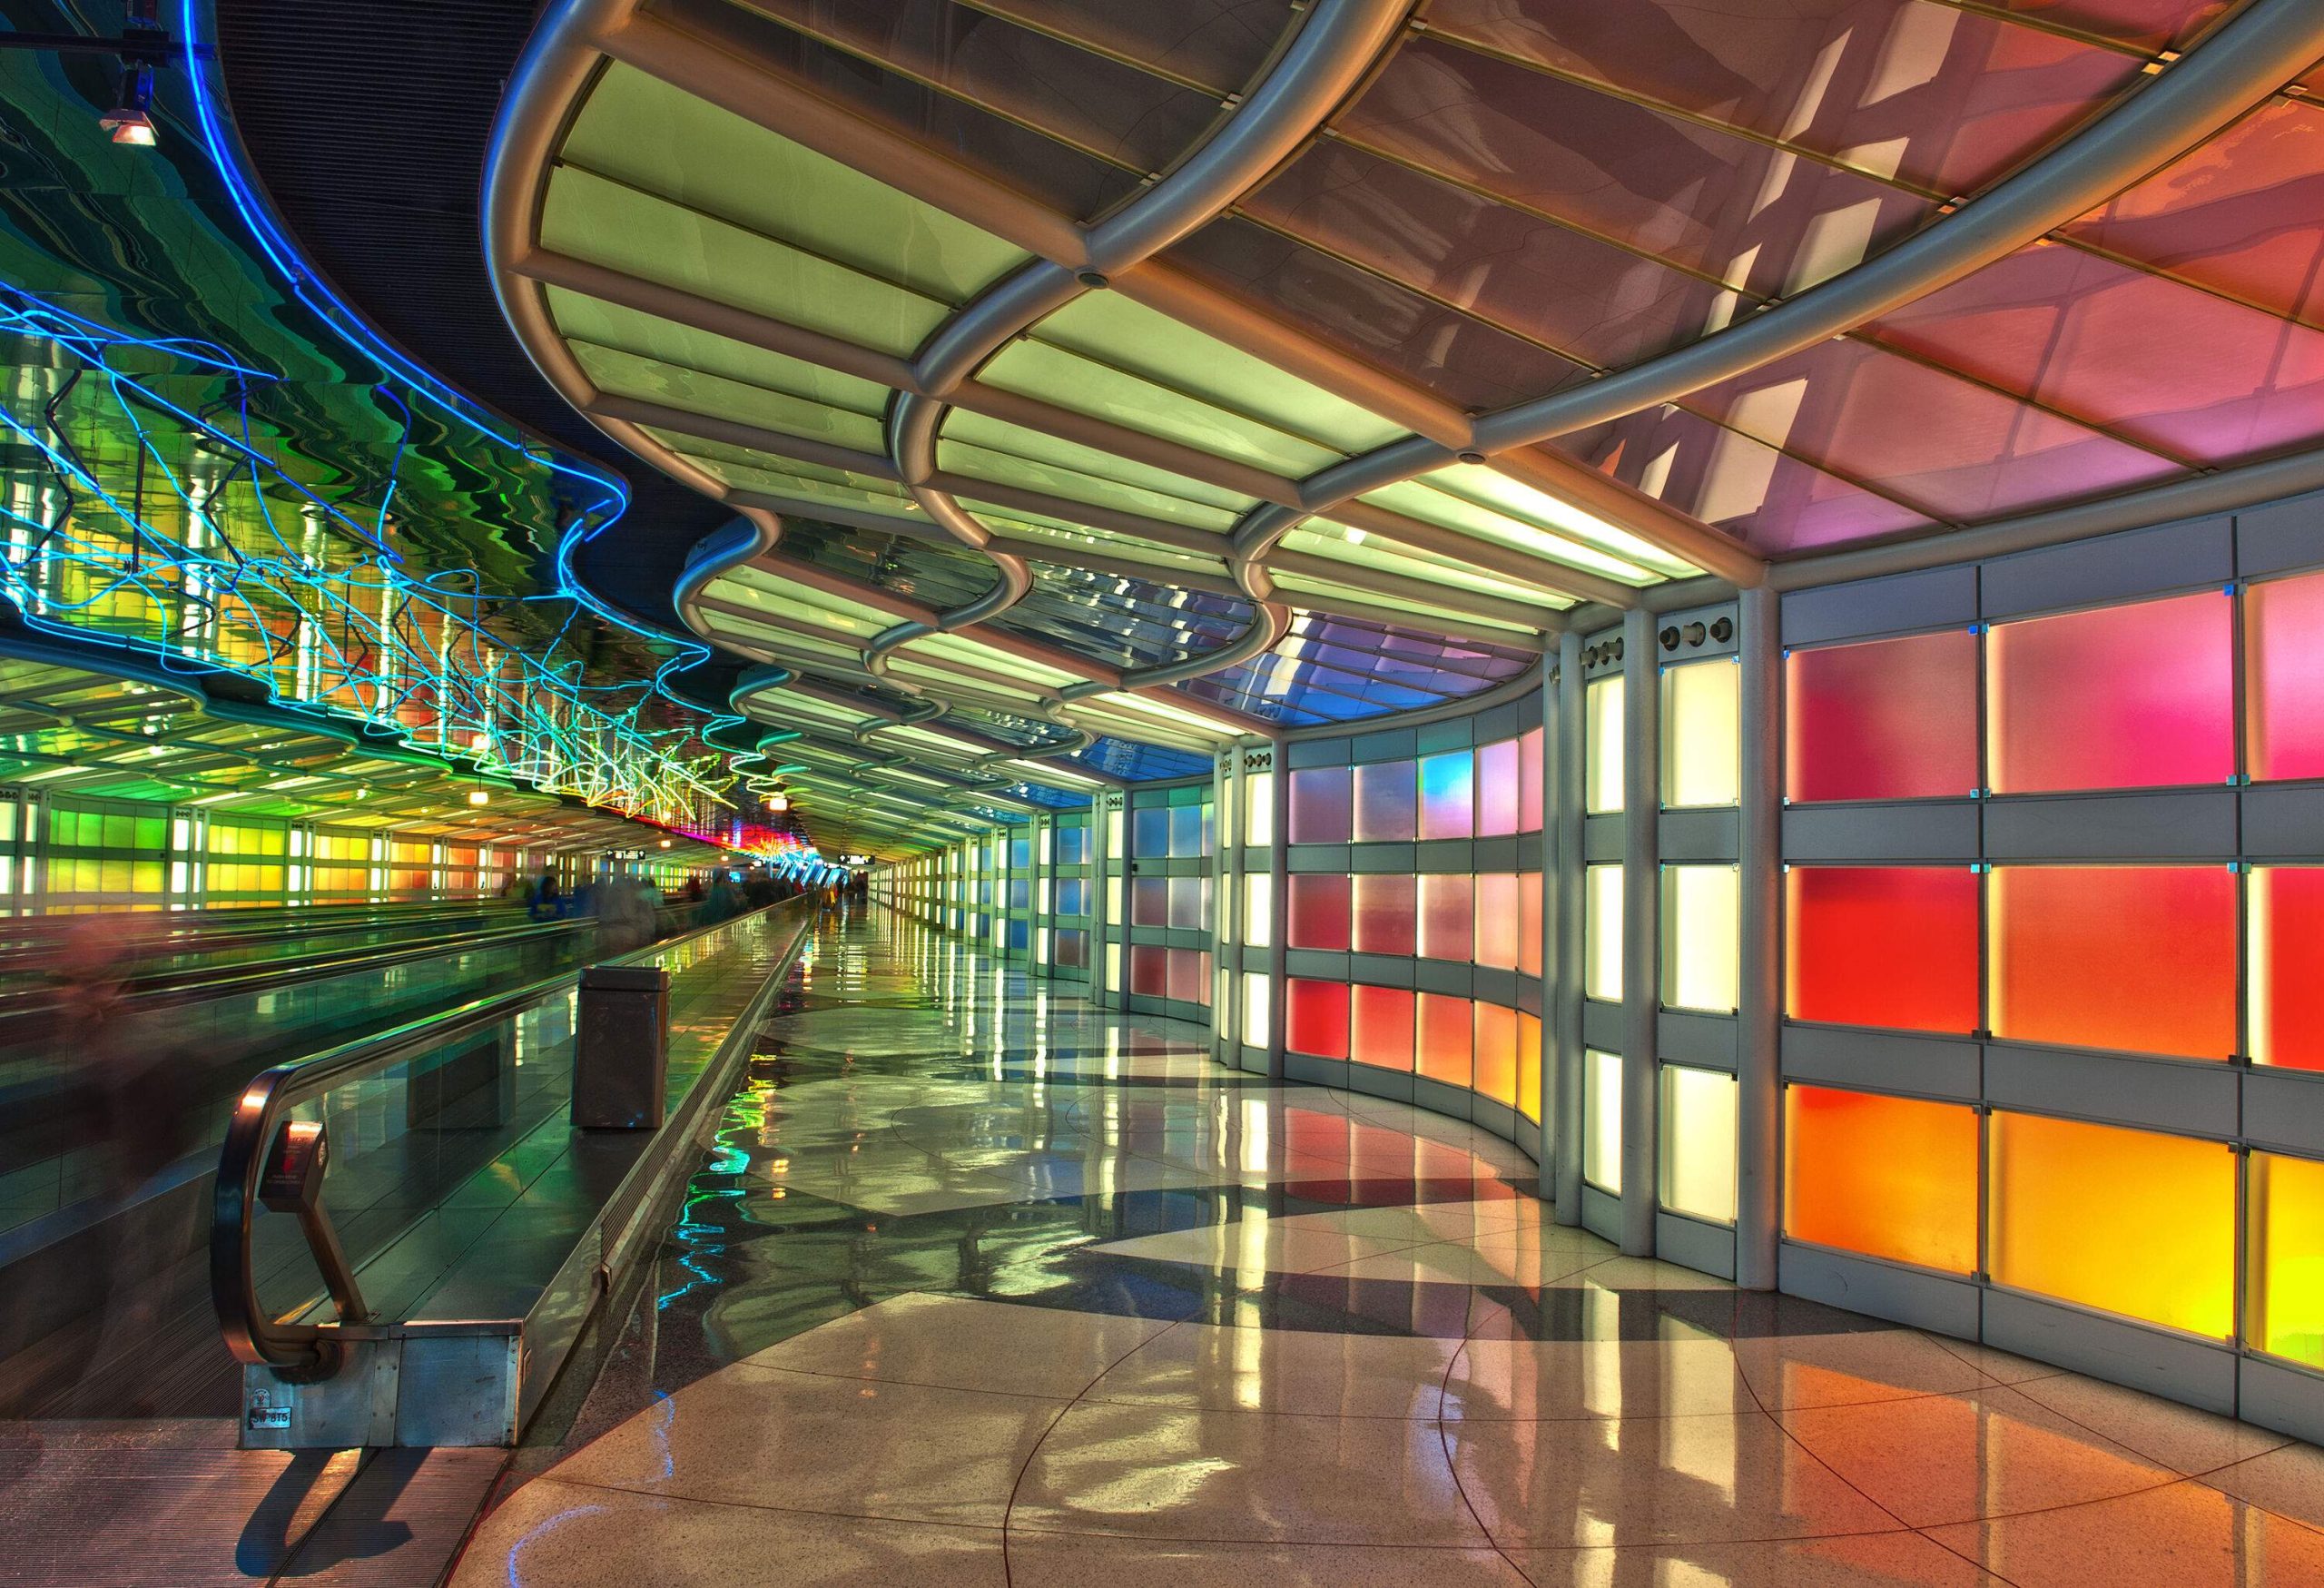 The inside of a passenger tunnel features colourful walls and winding and bright ceilings.